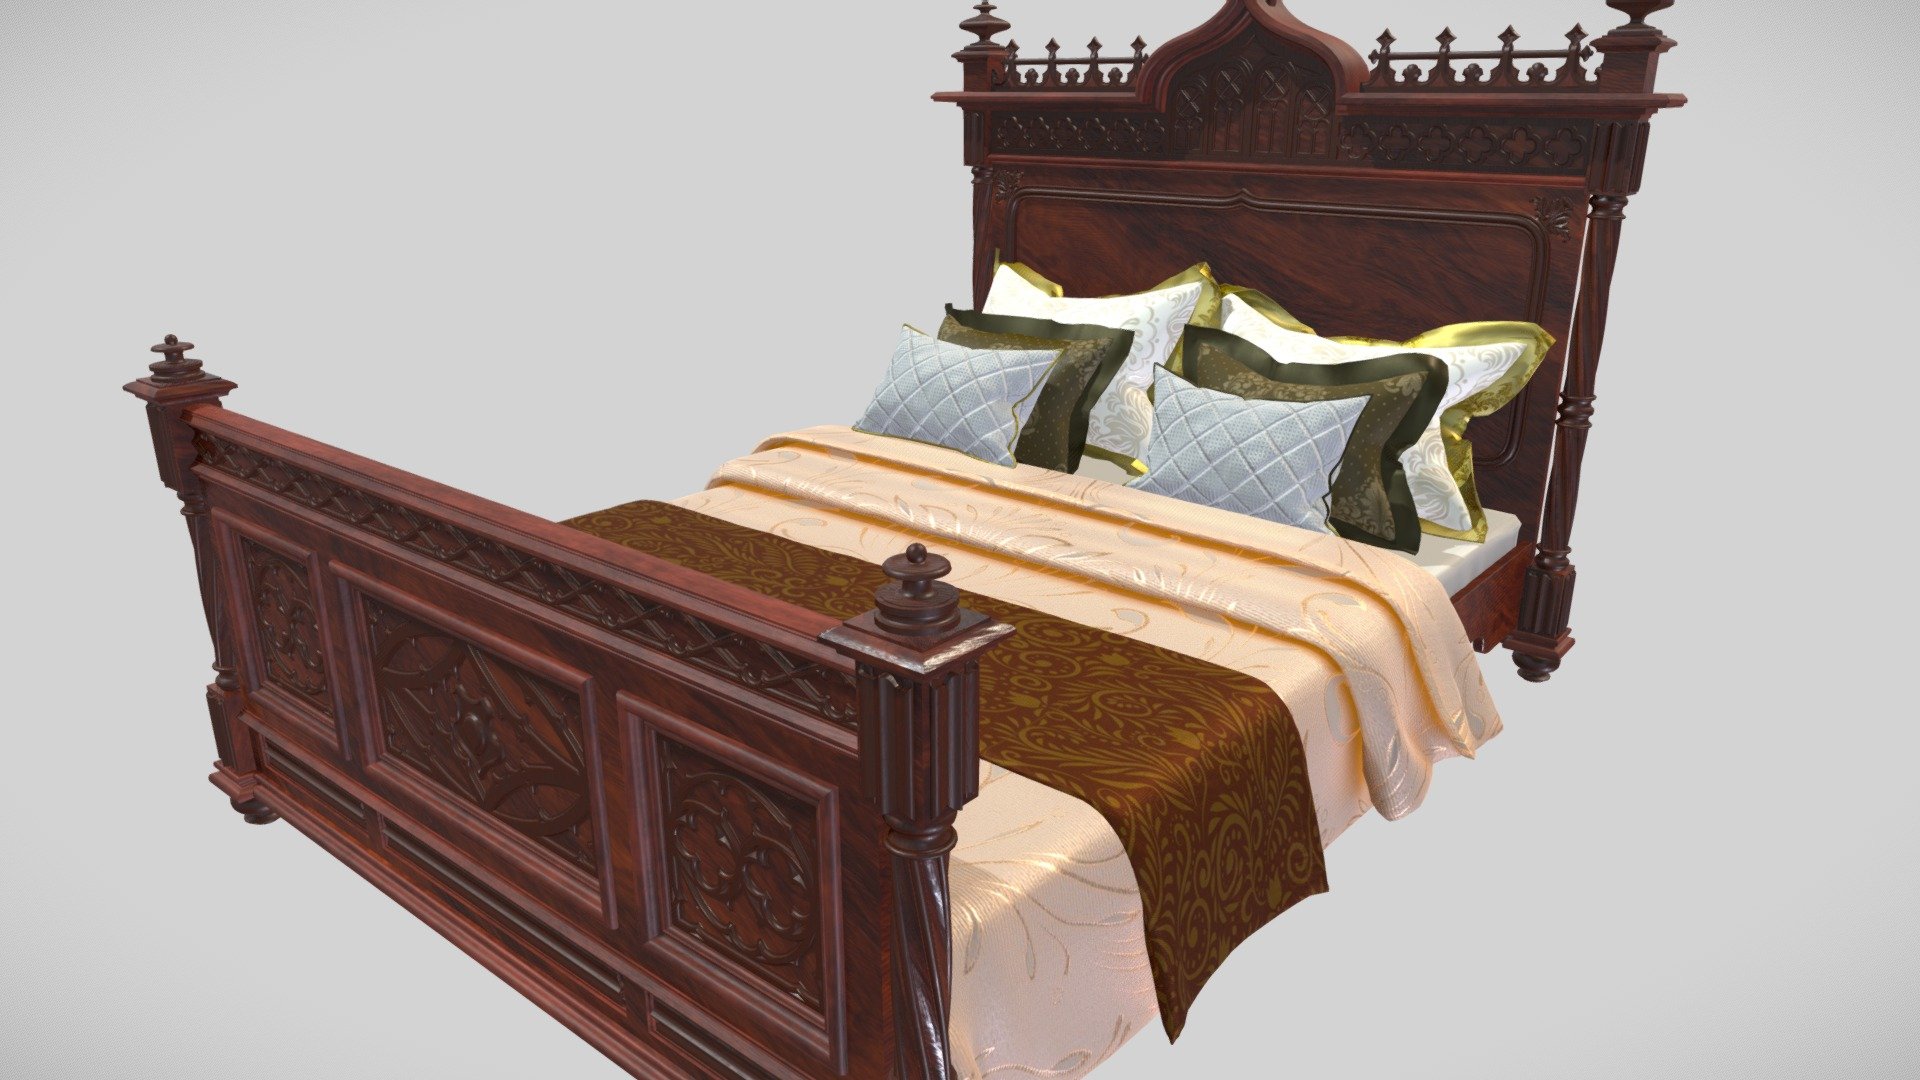 Bed linen consists of sheets, blankets, bedspread. There are also six unique pillows with Vicotrian motifs. 

The bed itself is made of light acacia wood, the carvings are covered with dark wood. The headboard is decorated with carvings. 

The model is suitable for a bedroom of the late 19th century.  Models also have LODs and custom coliders for easy use as game props. Packed Ambient oclusion(R), roughness(G) and metalic(B) and unreal engine 4 project is also included.

Everyone should sleep in this bed at least once in their life 3d model